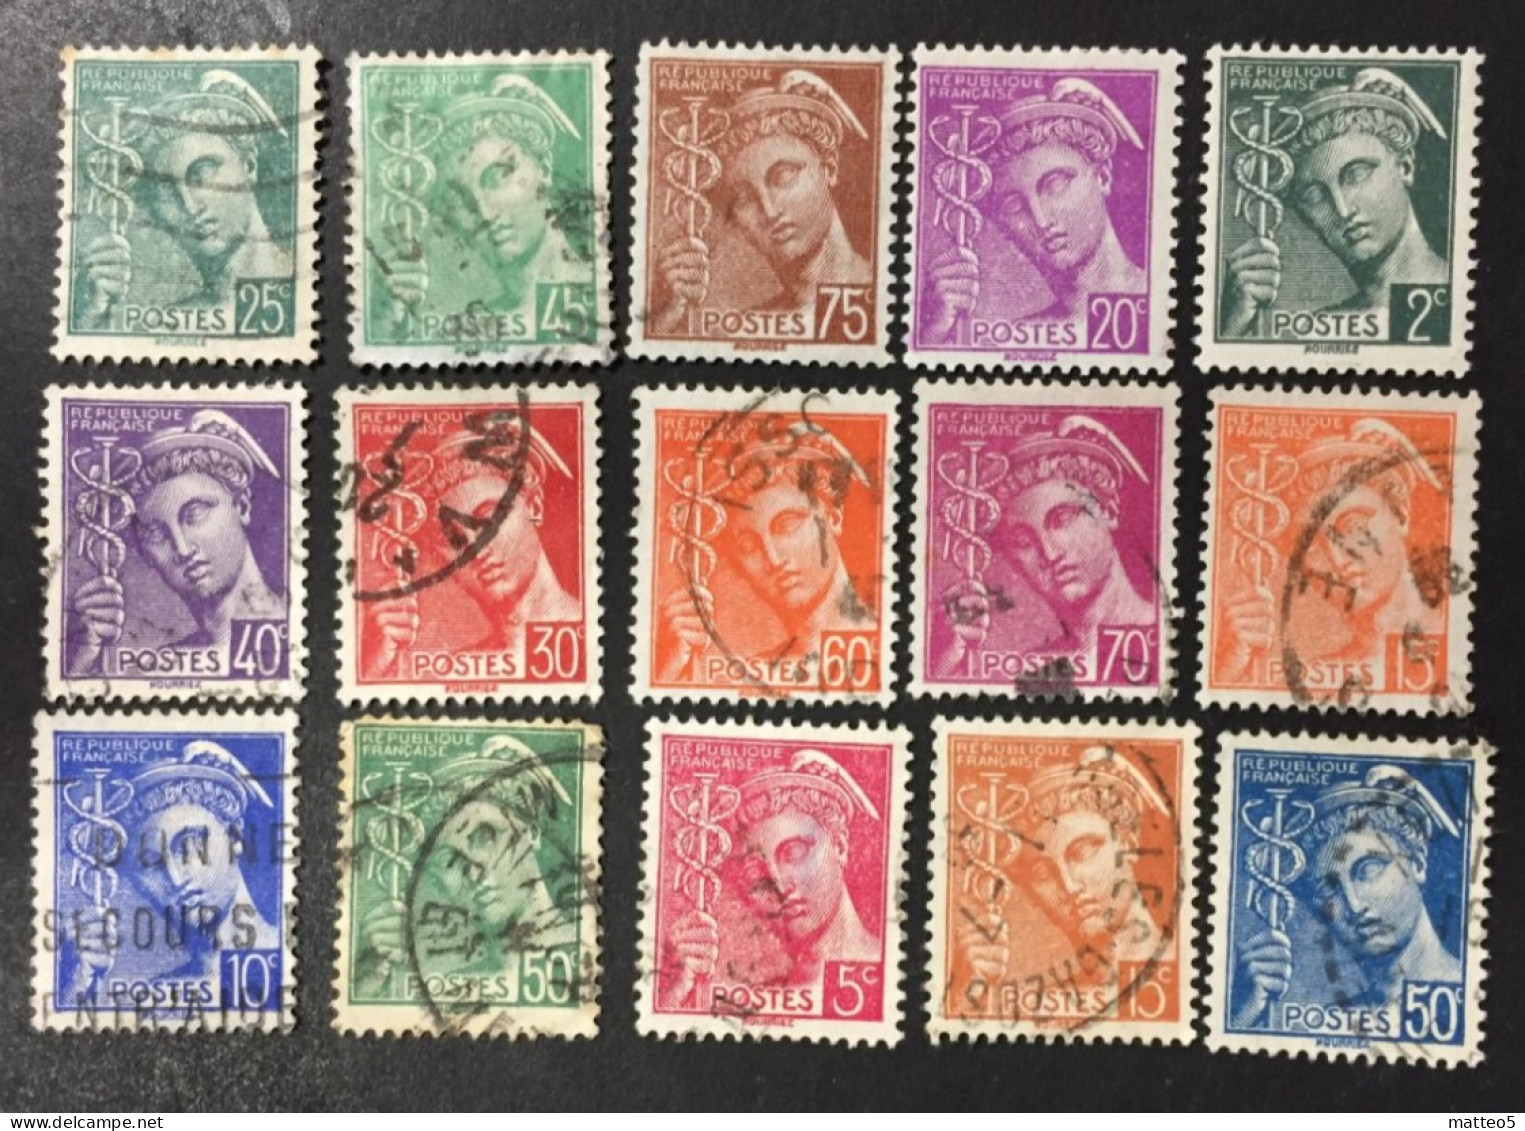 1930 /40 France - Mercury - 15 Stamps Used - 1938-42 Mercure